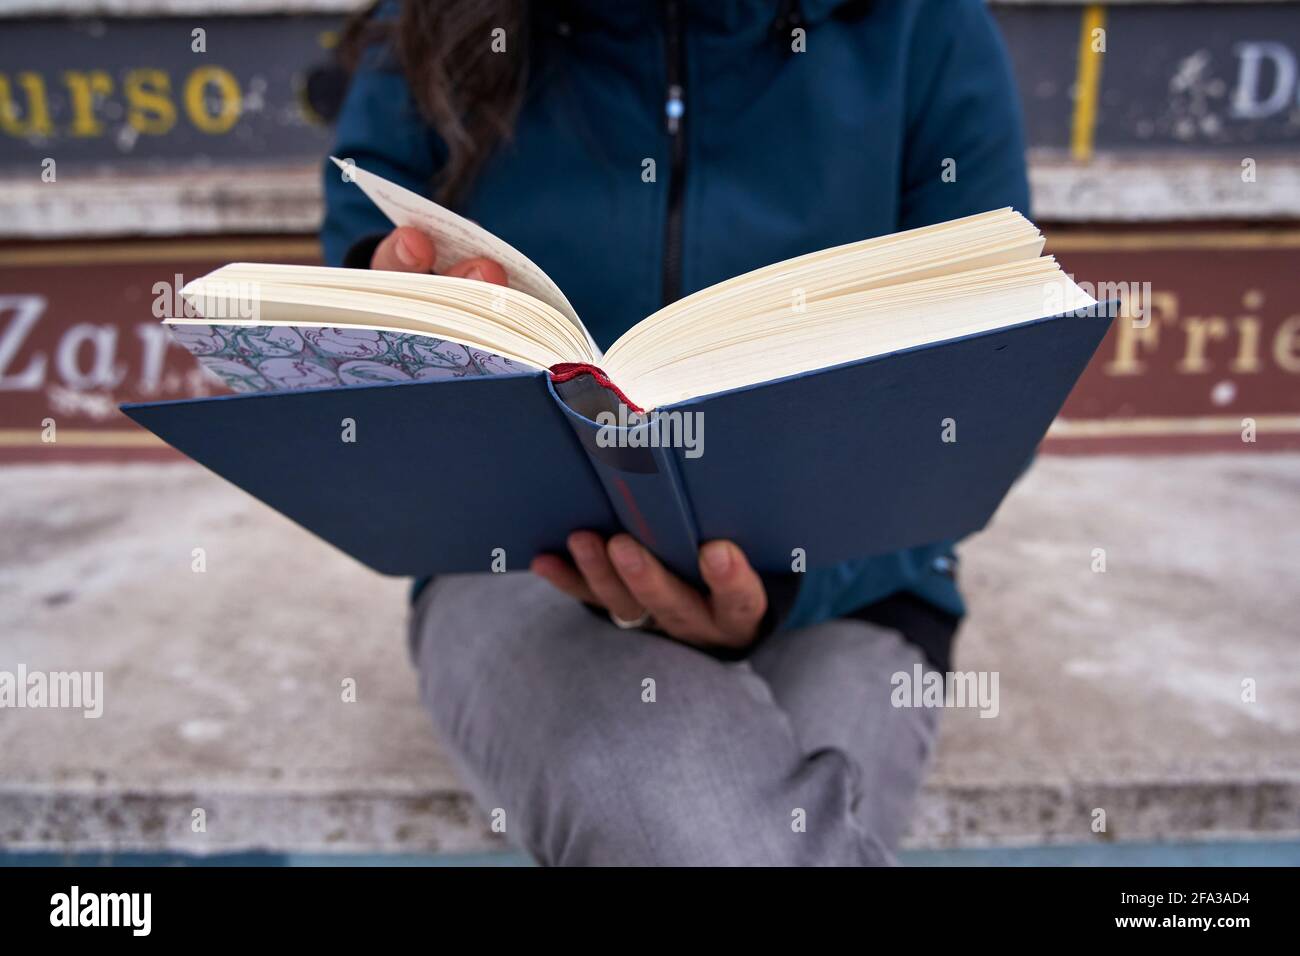 Detail of an open book being held by a woman, cropped out of focus. Stock Photo